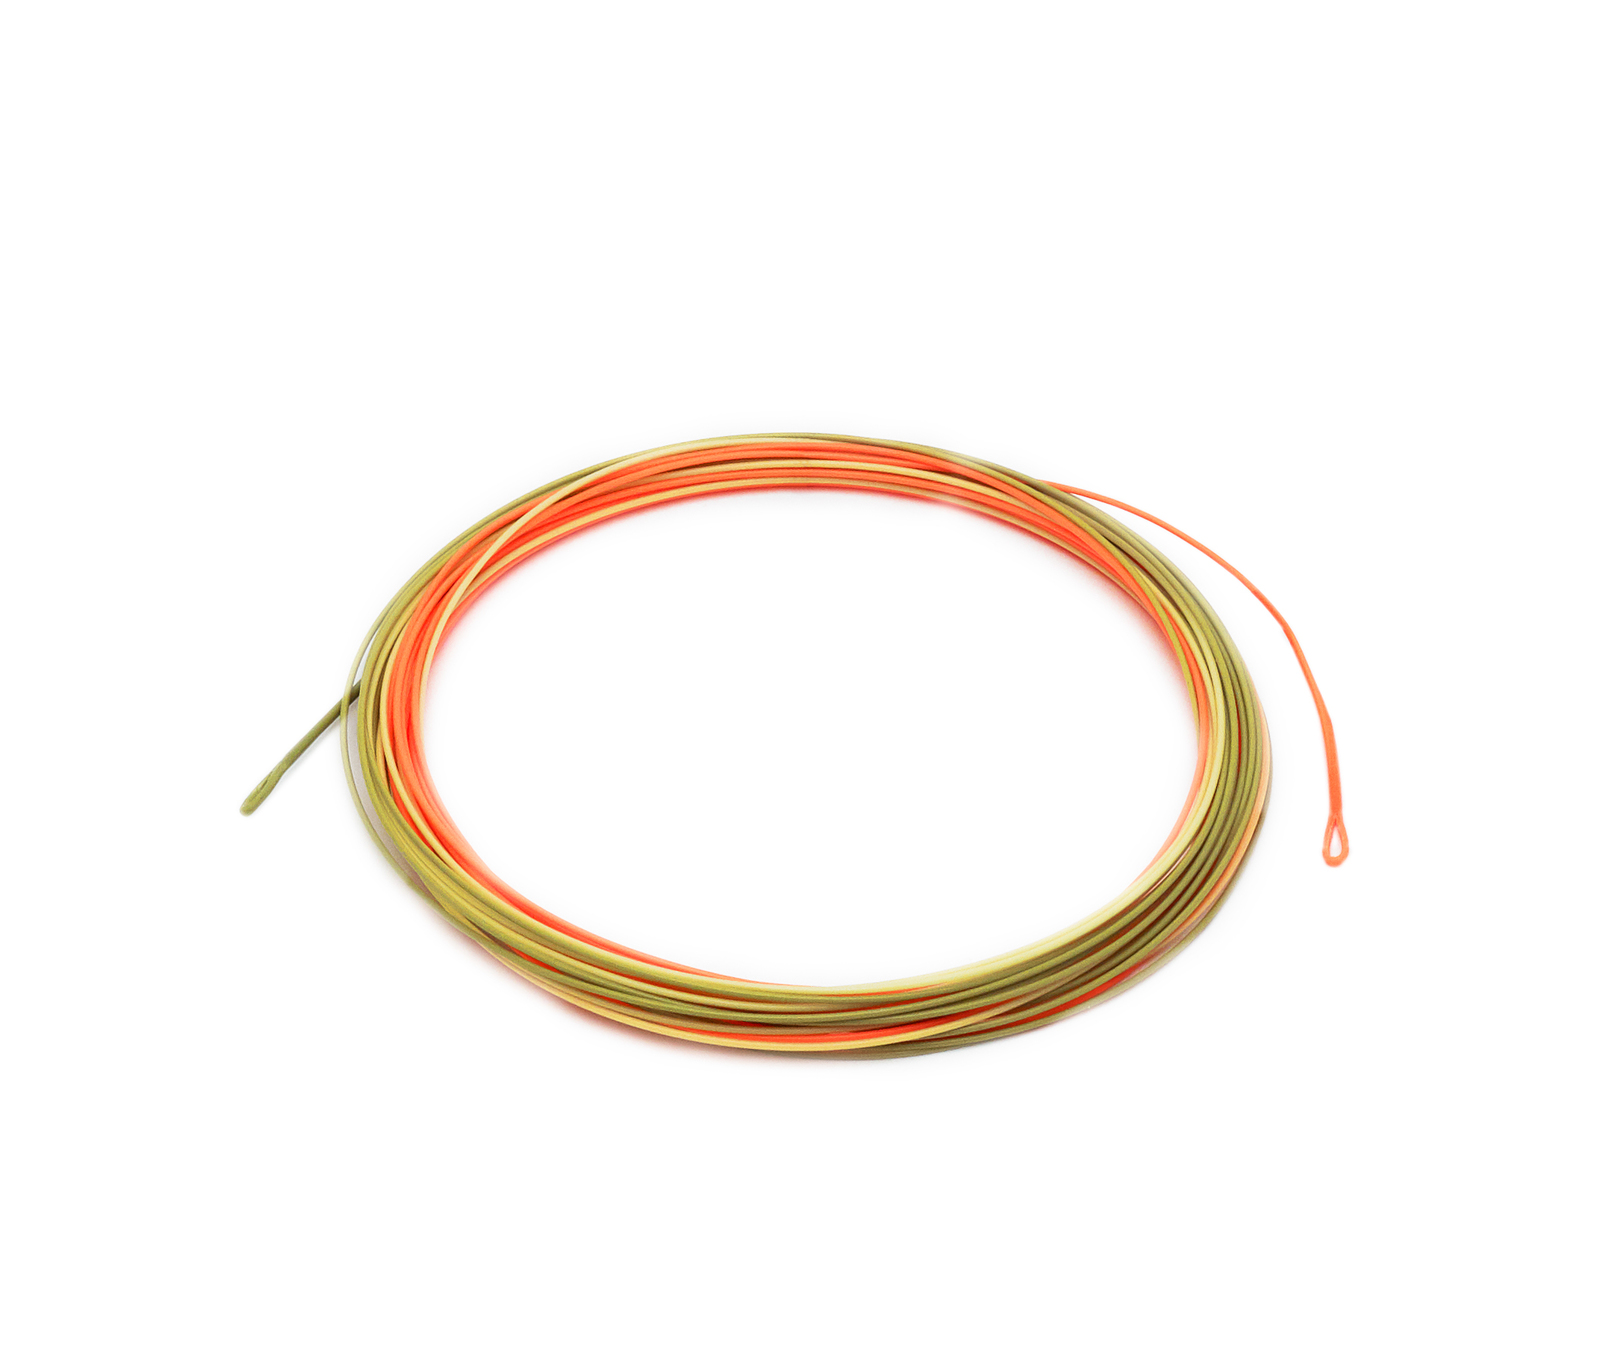 Rio Freshwater Specialty Series Euro Nymph Shorty Fly Line · Double · 2-5wt · Floating · Orange